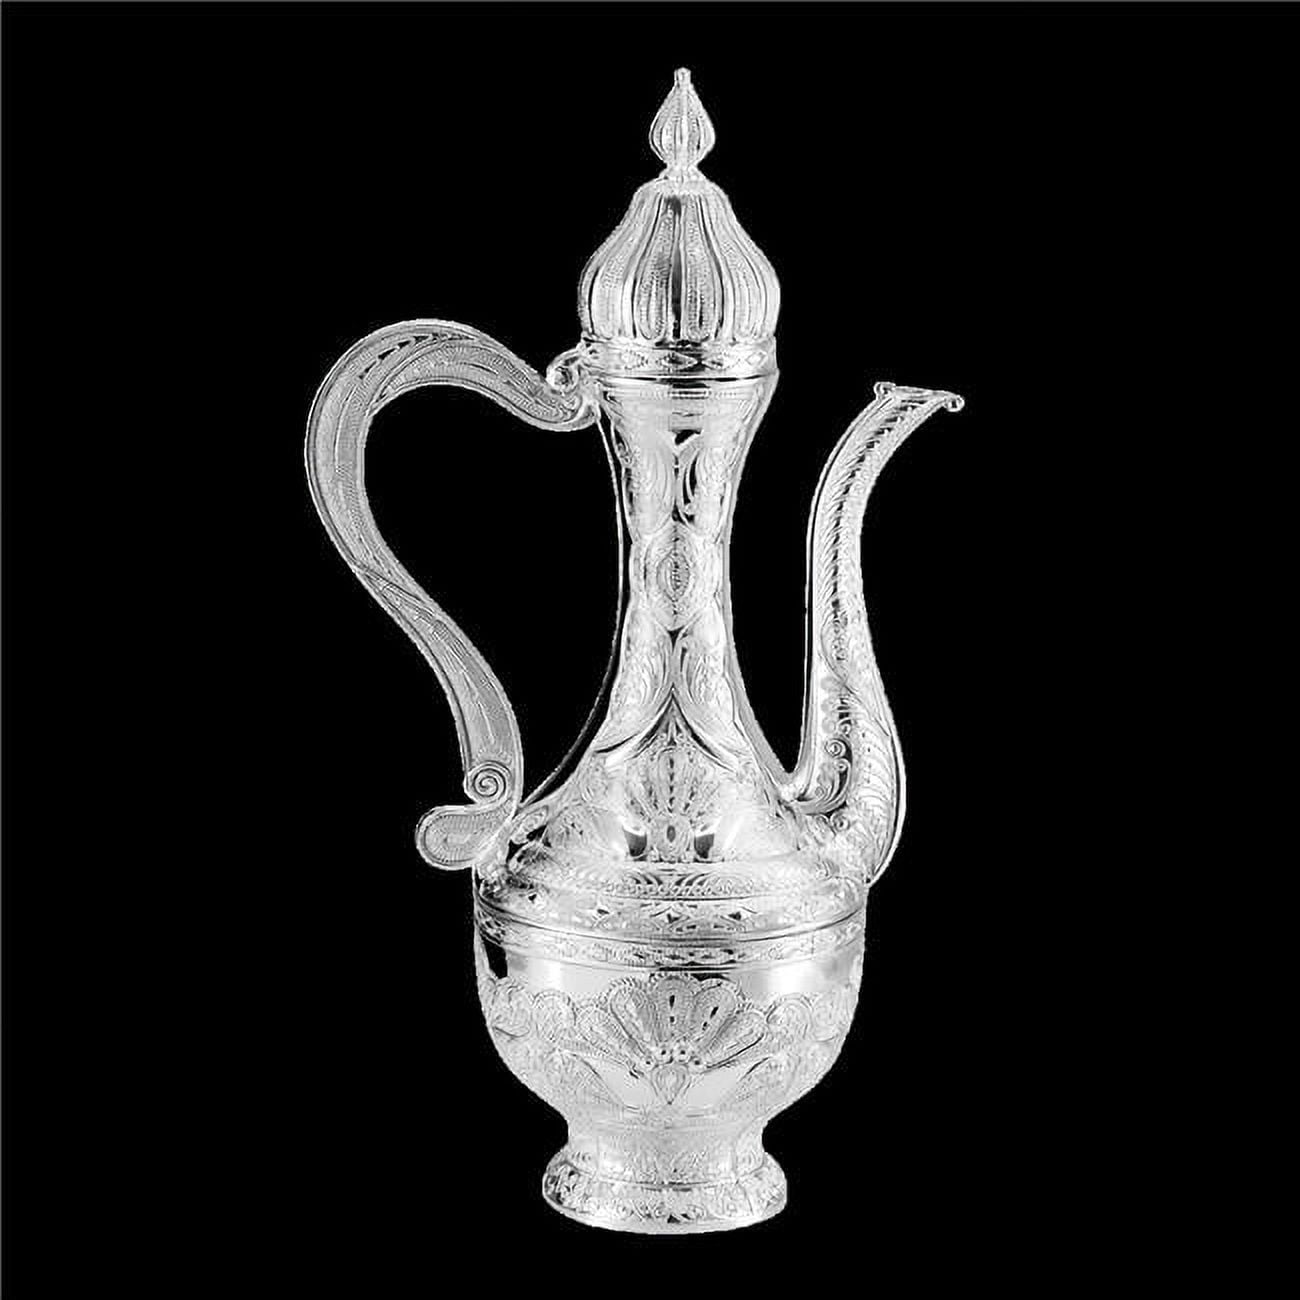 Picture of Nua 59078 8.5 in. Chanukah Kriegel & Oil Bottle Silver Plated with Cover Filigree